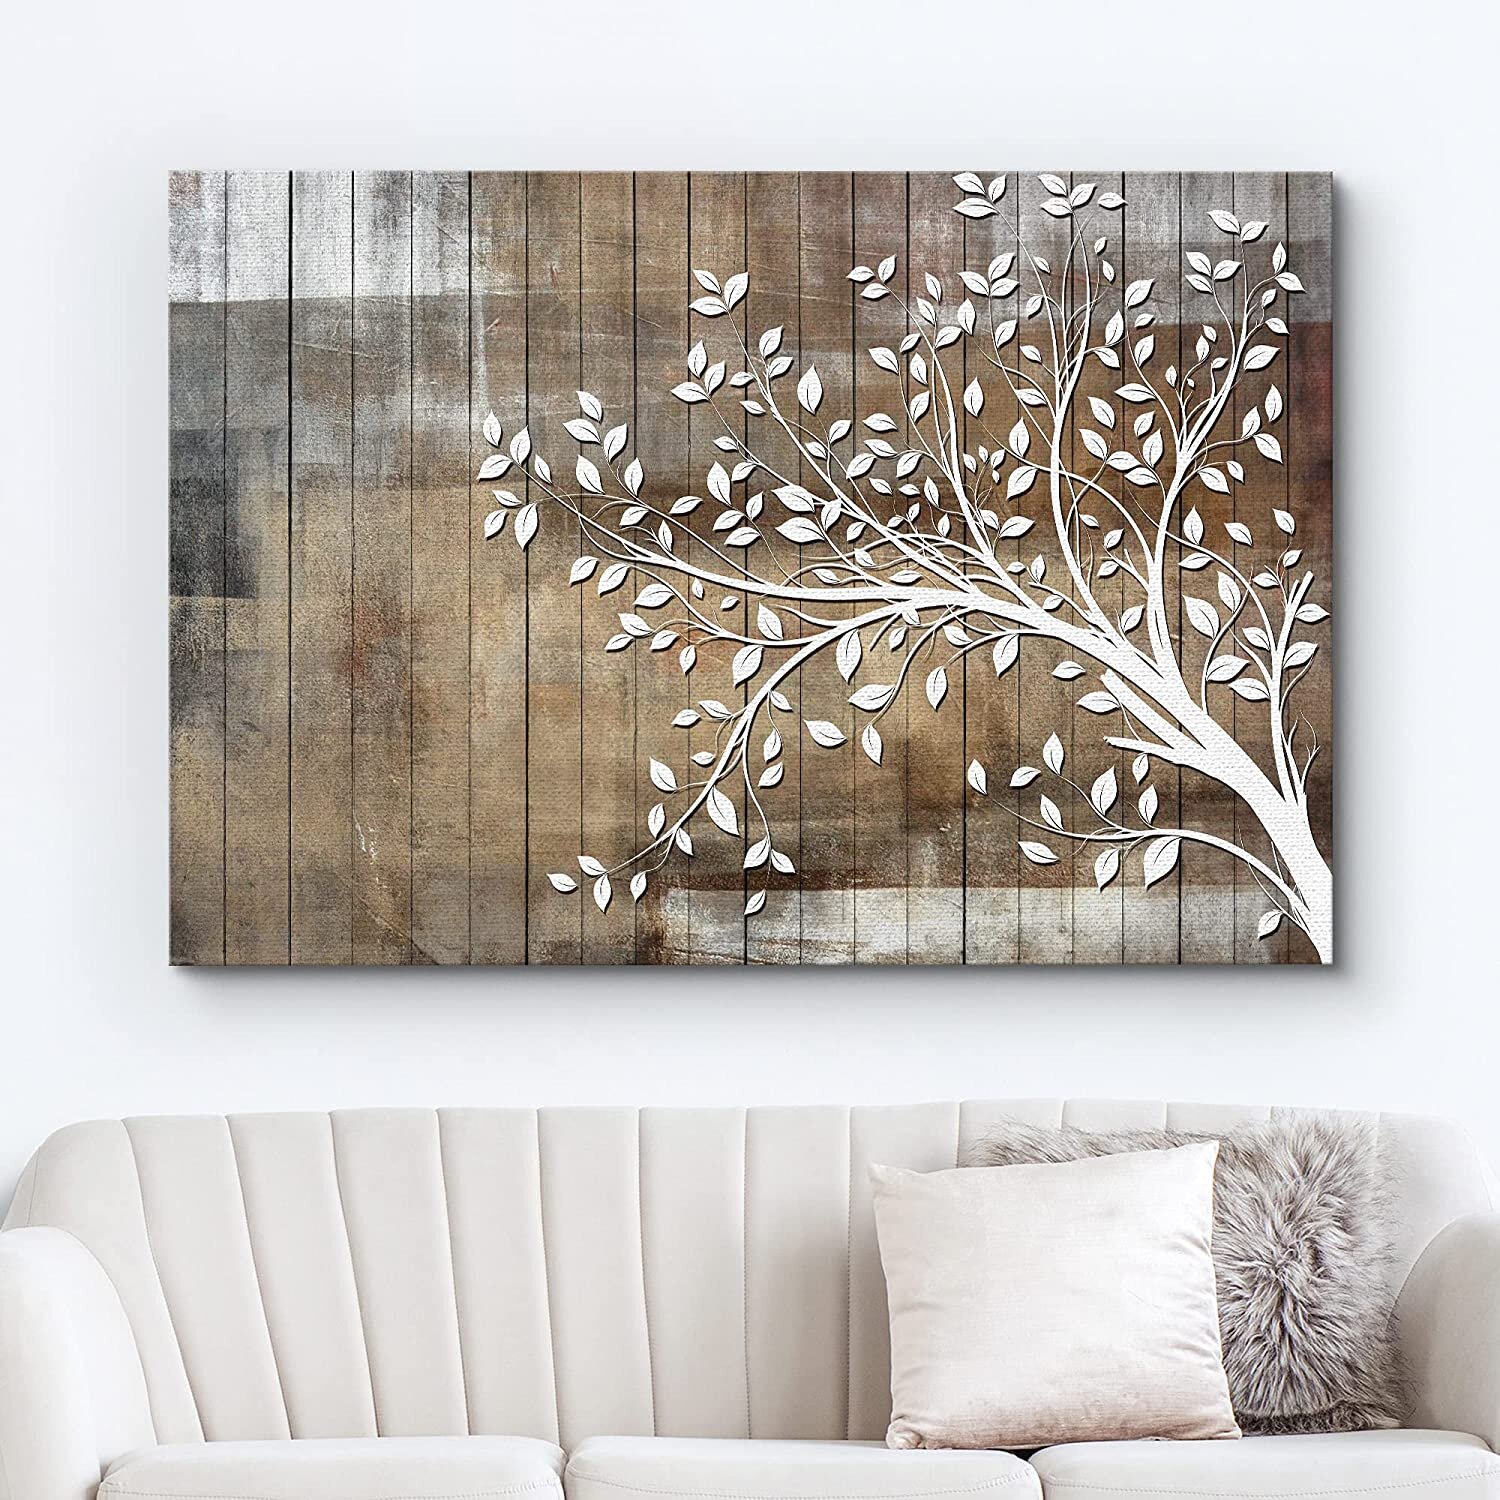 Brown Feathers On Wood Art: Canvas Prints, Frames & Posters